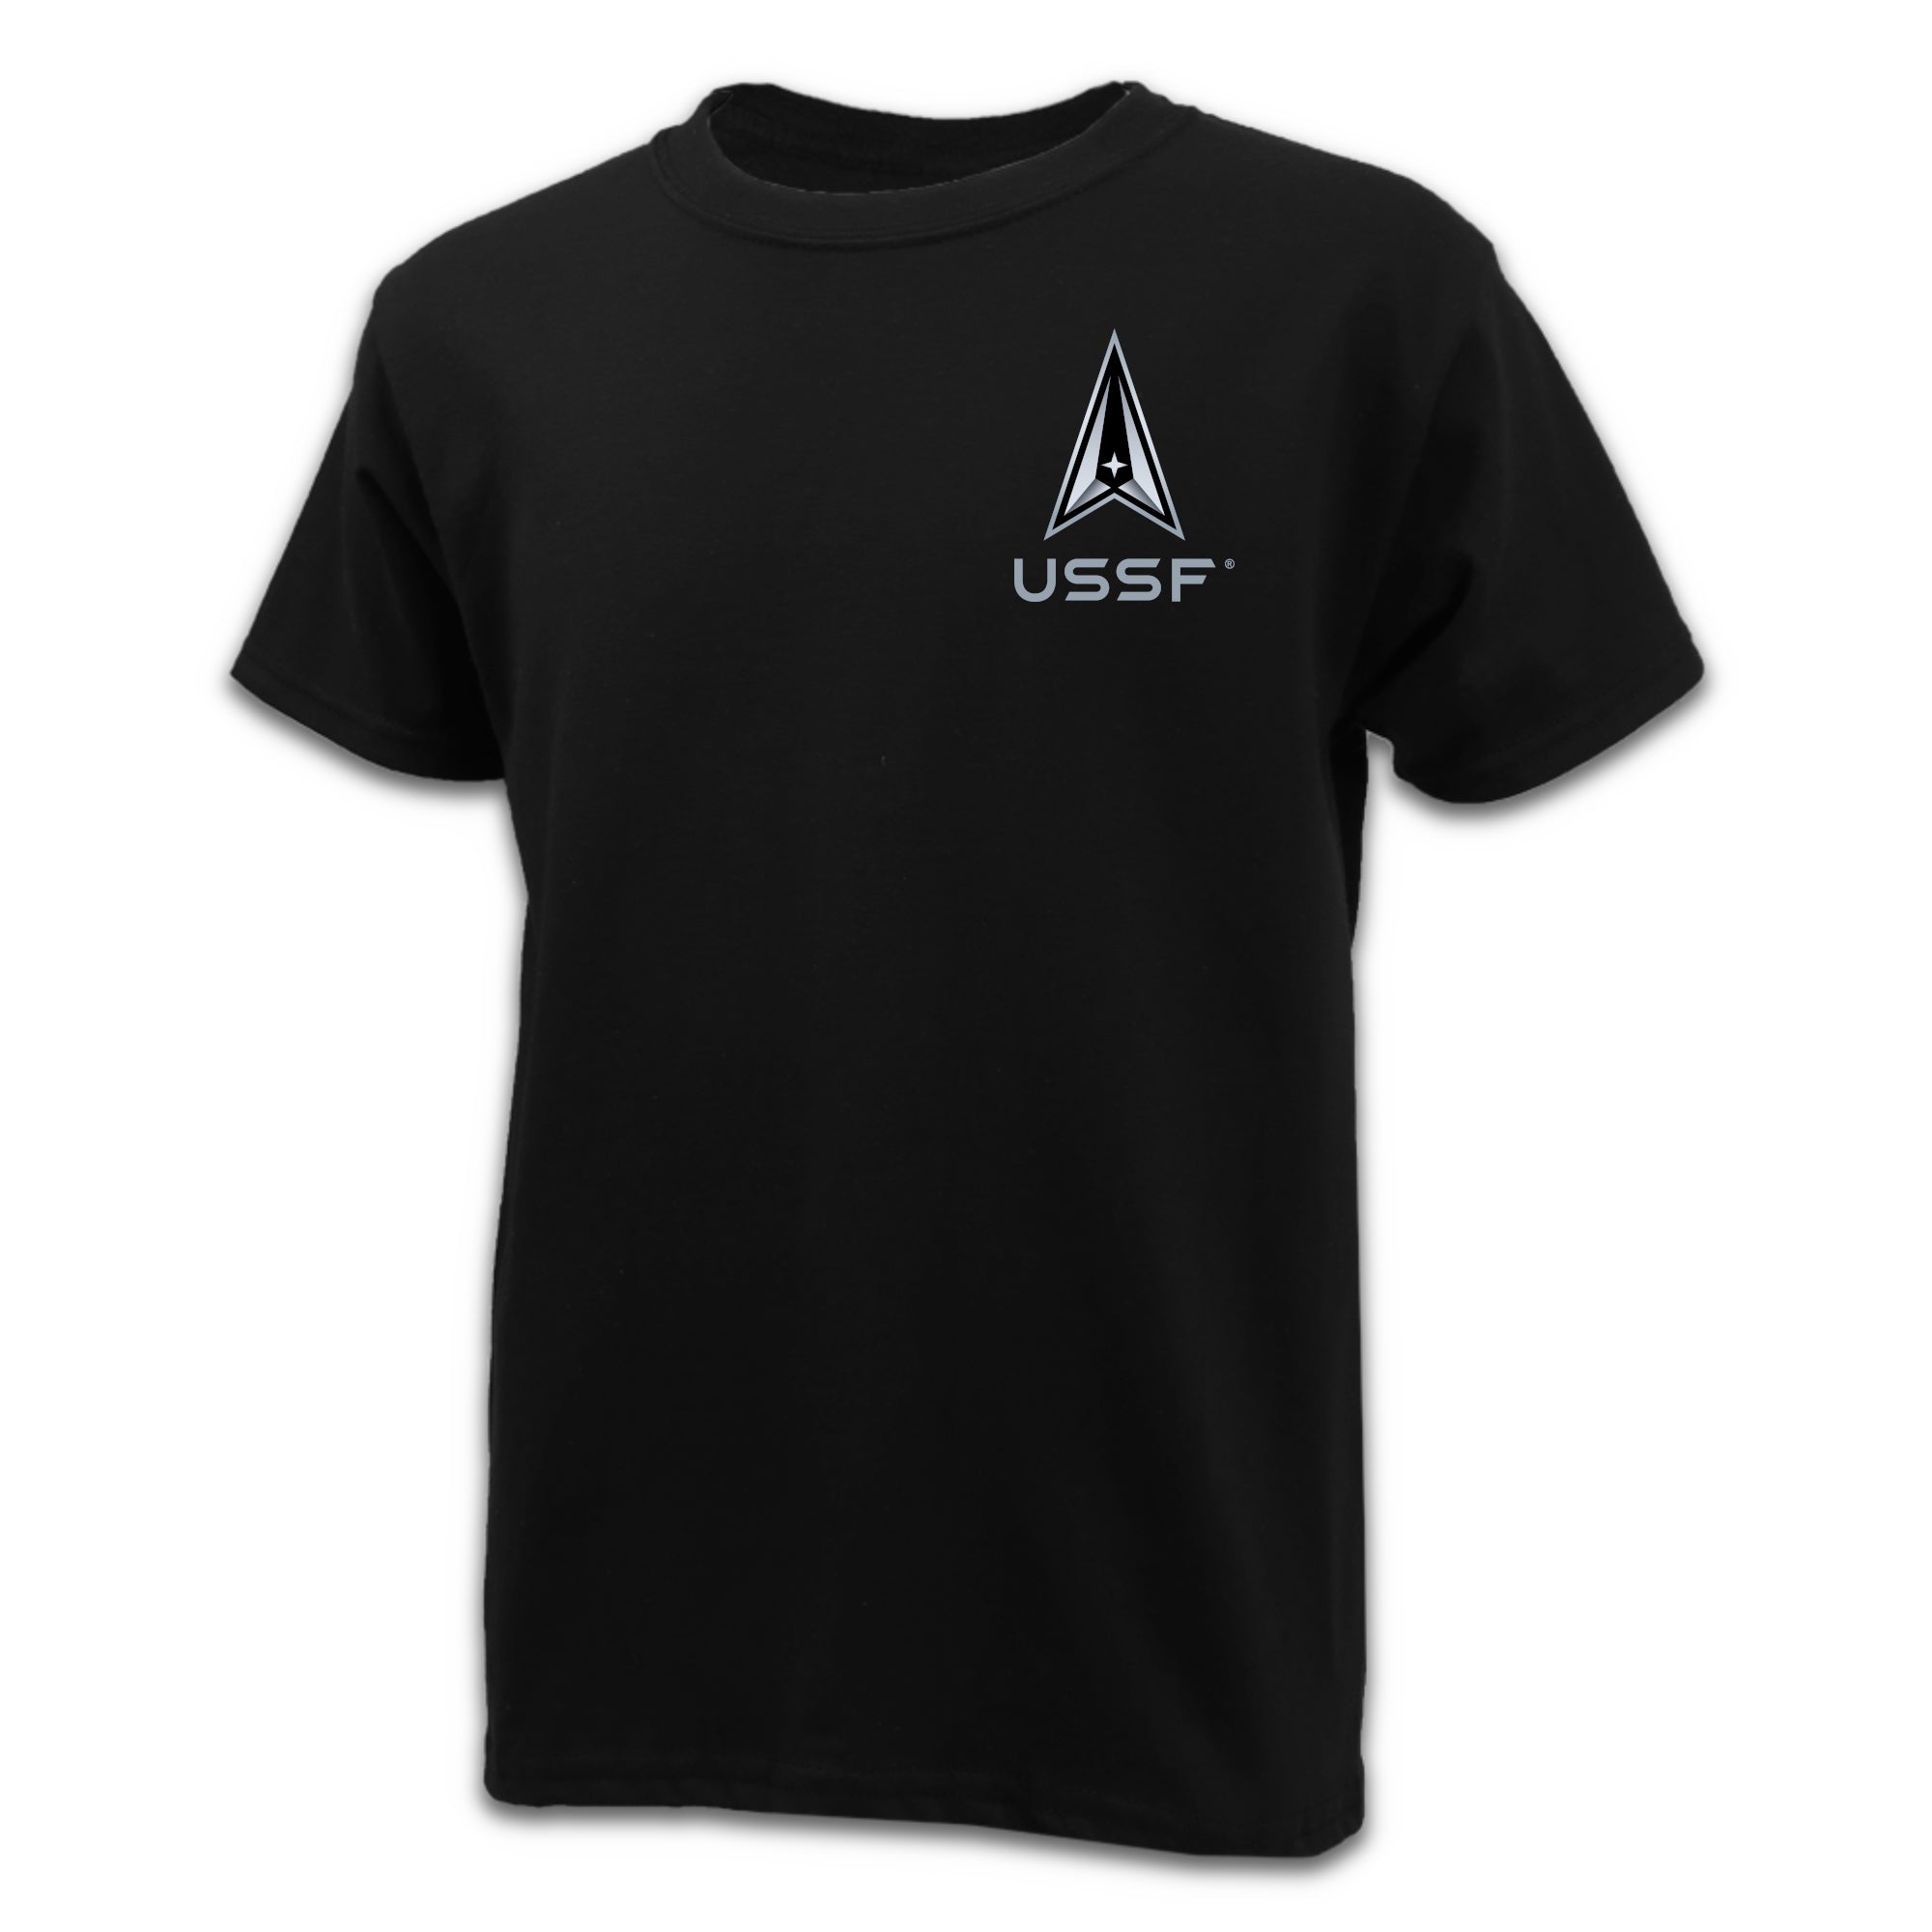 Space Force Youth Left Chest T-Shirt